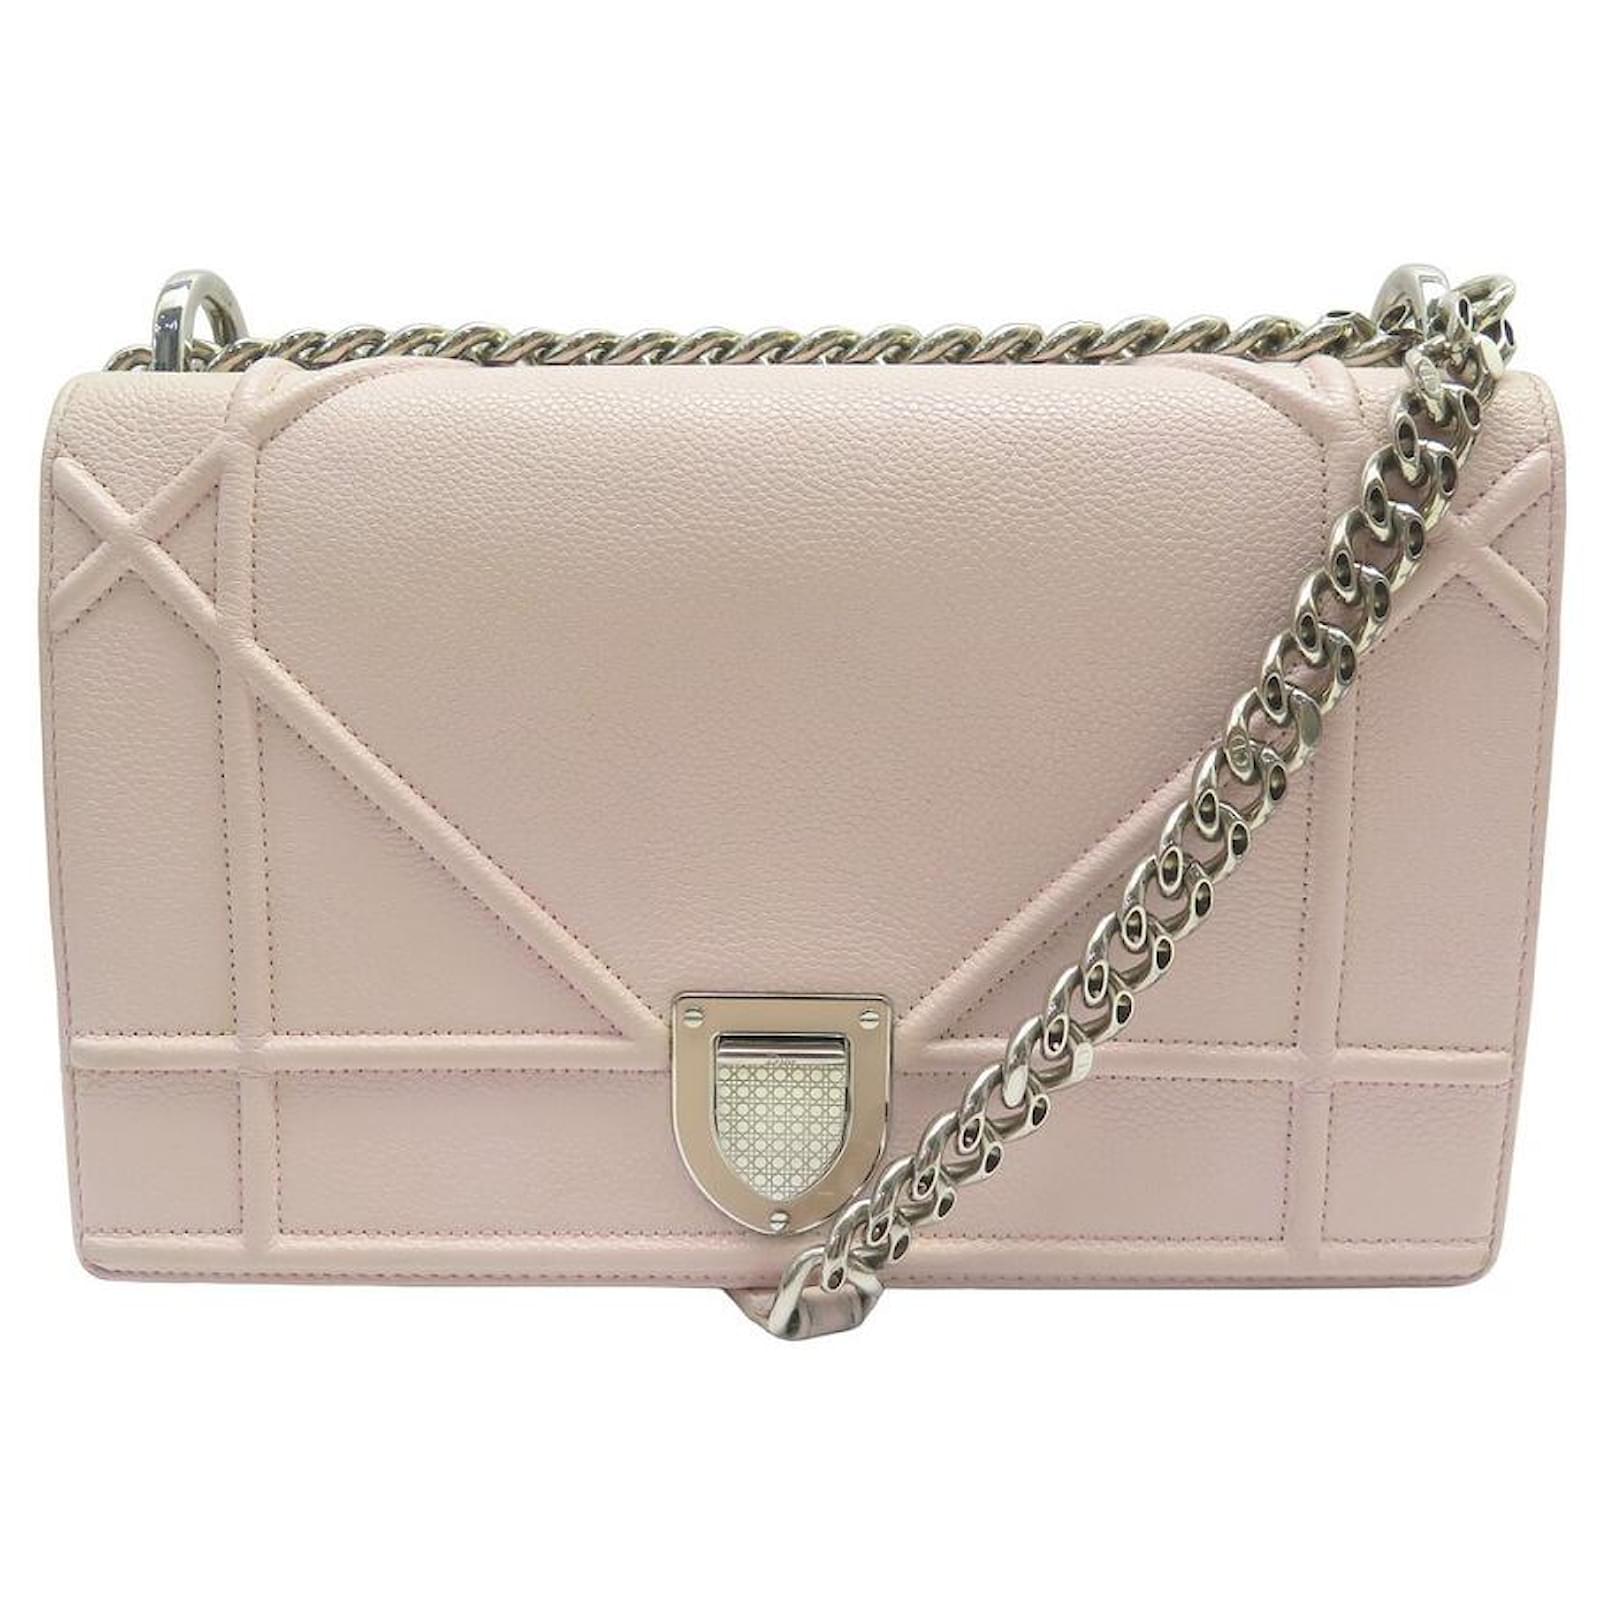 DIOR Pink Chain Purse Evening Bag Clutch cosmetic beauty pouch | eBay